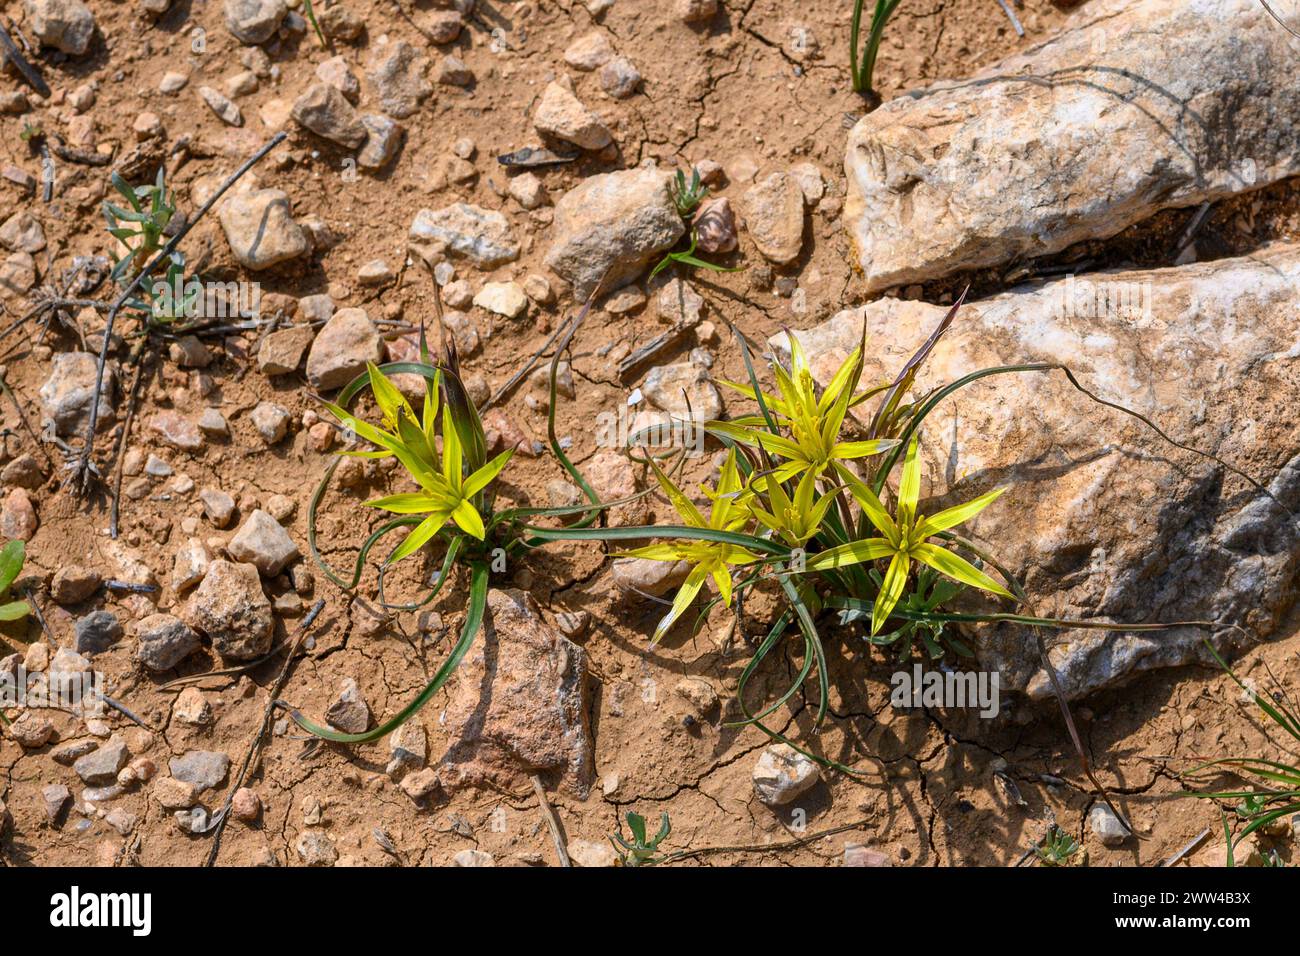 Gagea commutata common names include Stolonous Gagea and Yellow Star-of-Bethlehem, Photographed at Har Amasa (Mount Amasa), Israel in spring February Stock Photo